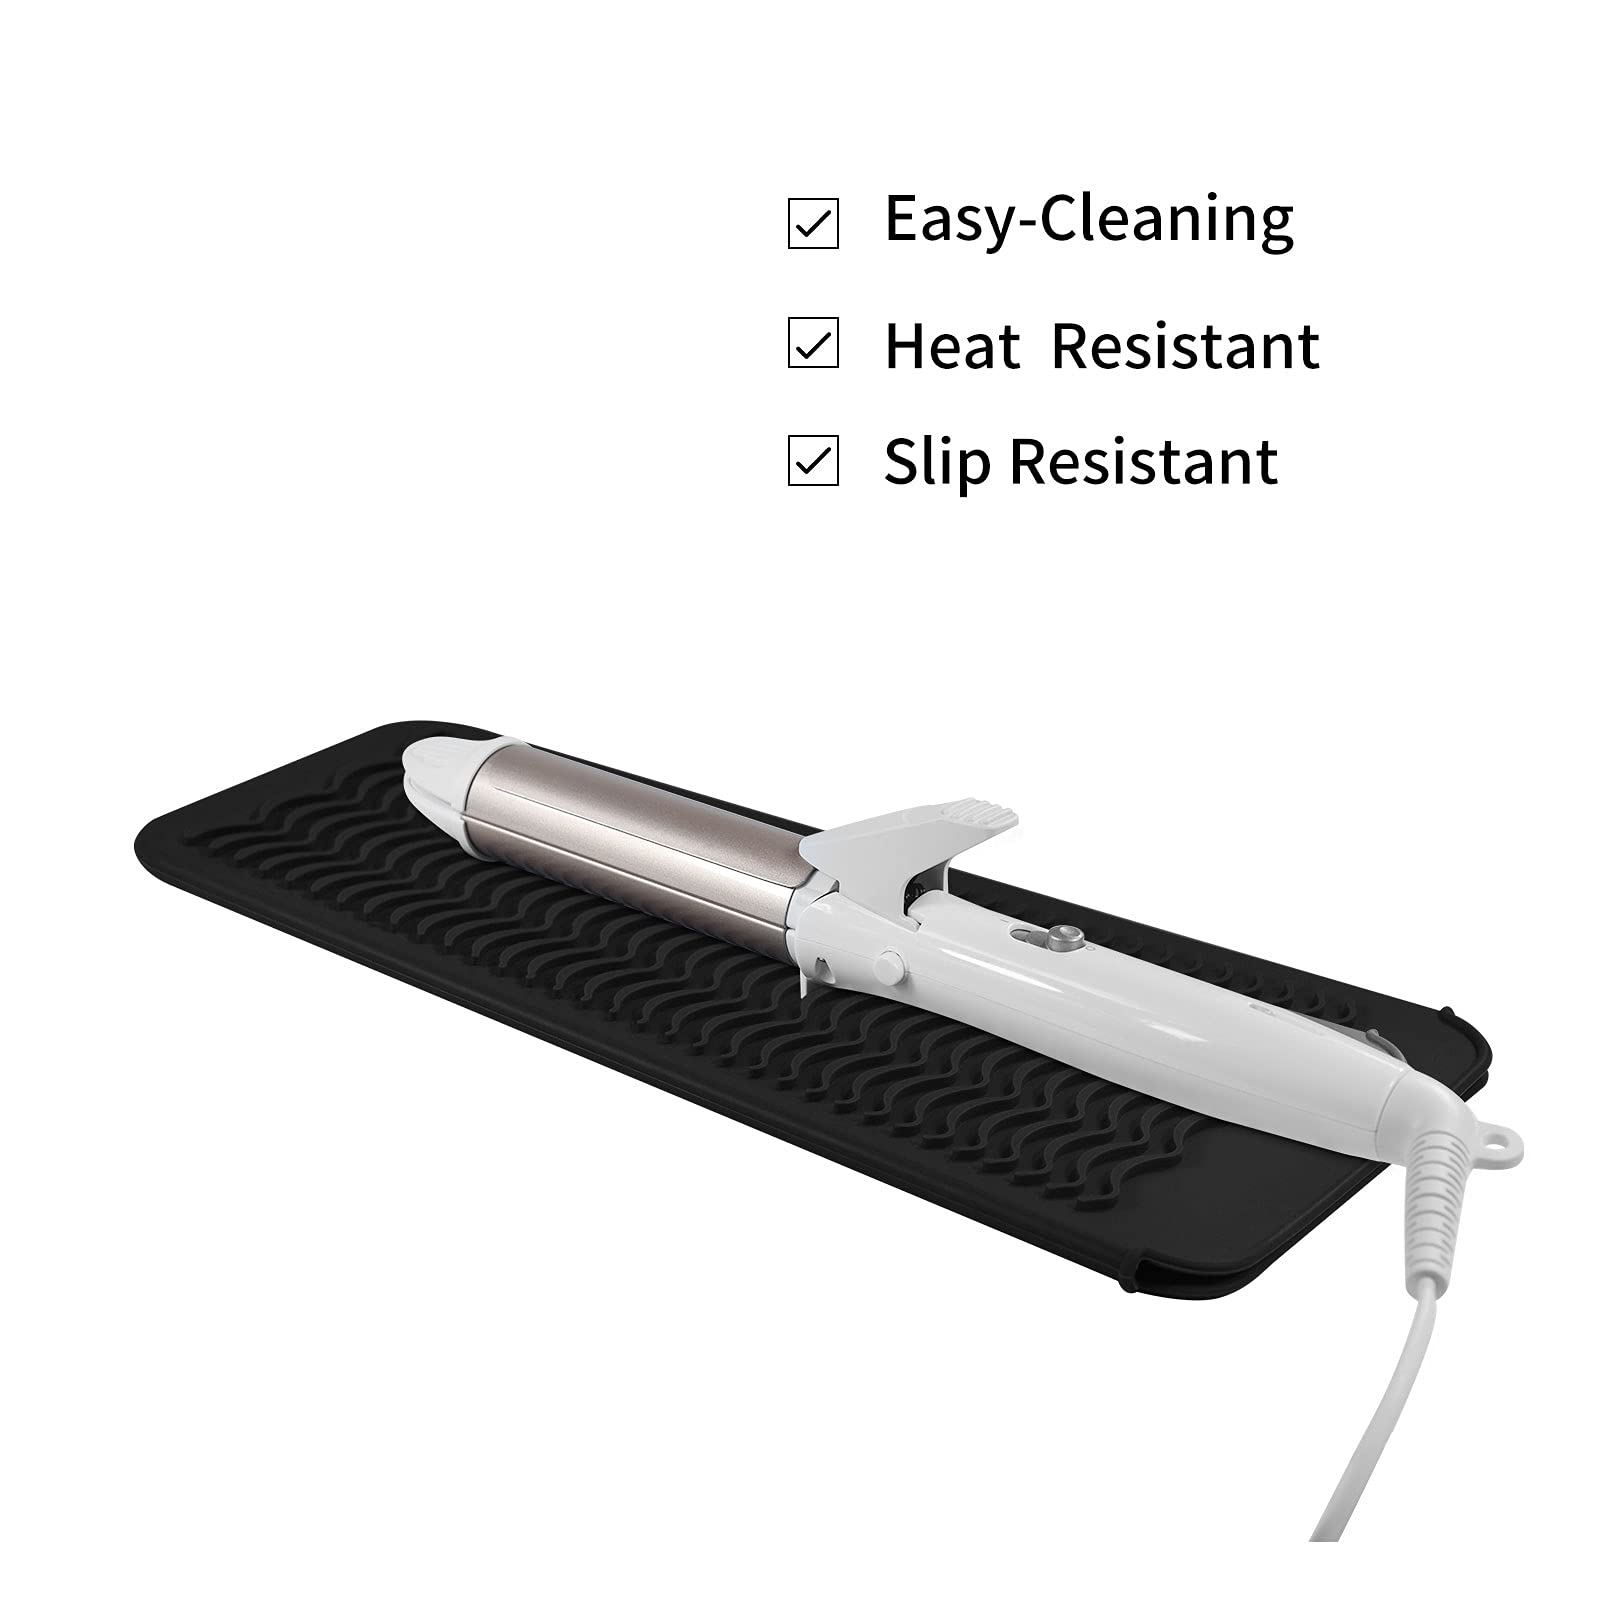 EIOKIT Silicone Heat Resistant Travel Mat Pouch for Hair Straightener,Crimping , Hair Curling Wand,Flat /Hair Waving Iron and Hot Hair Styling Tools (Black)